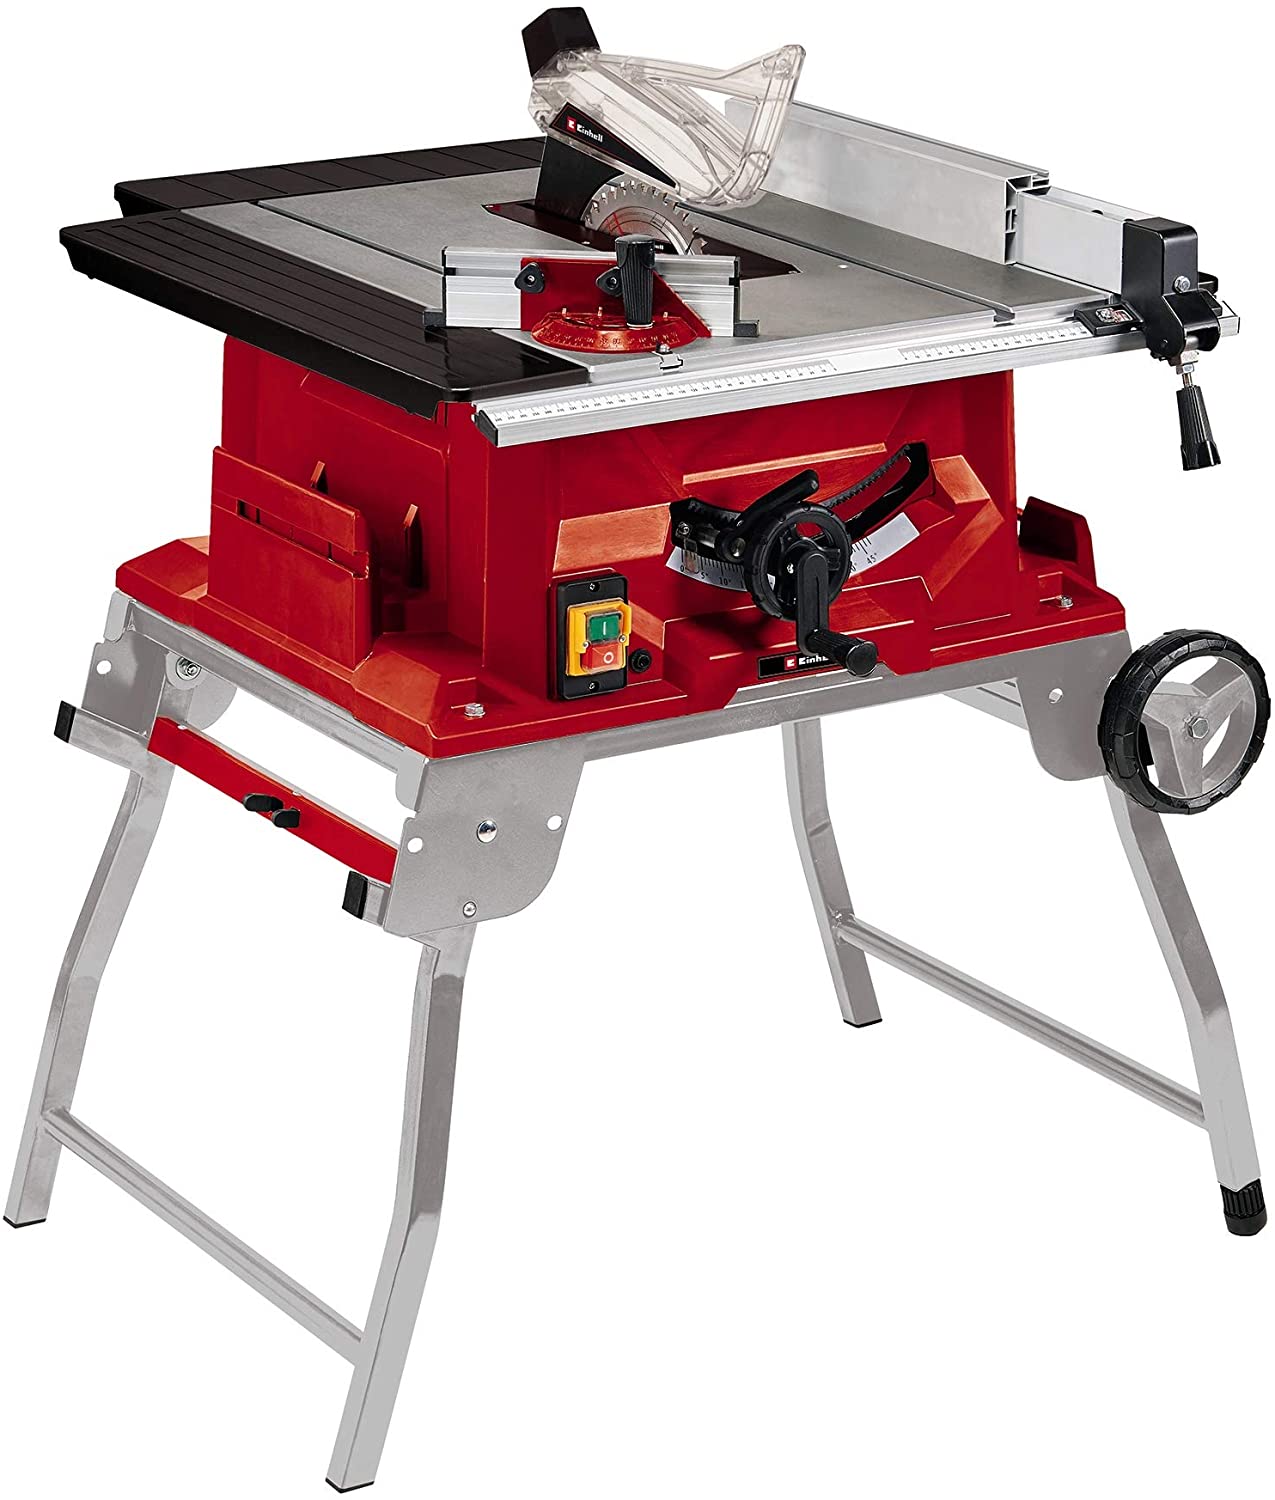 Einhell table saw TE-TS 250 UF (red, 1,500 watts) 4340568 (4006825647501)